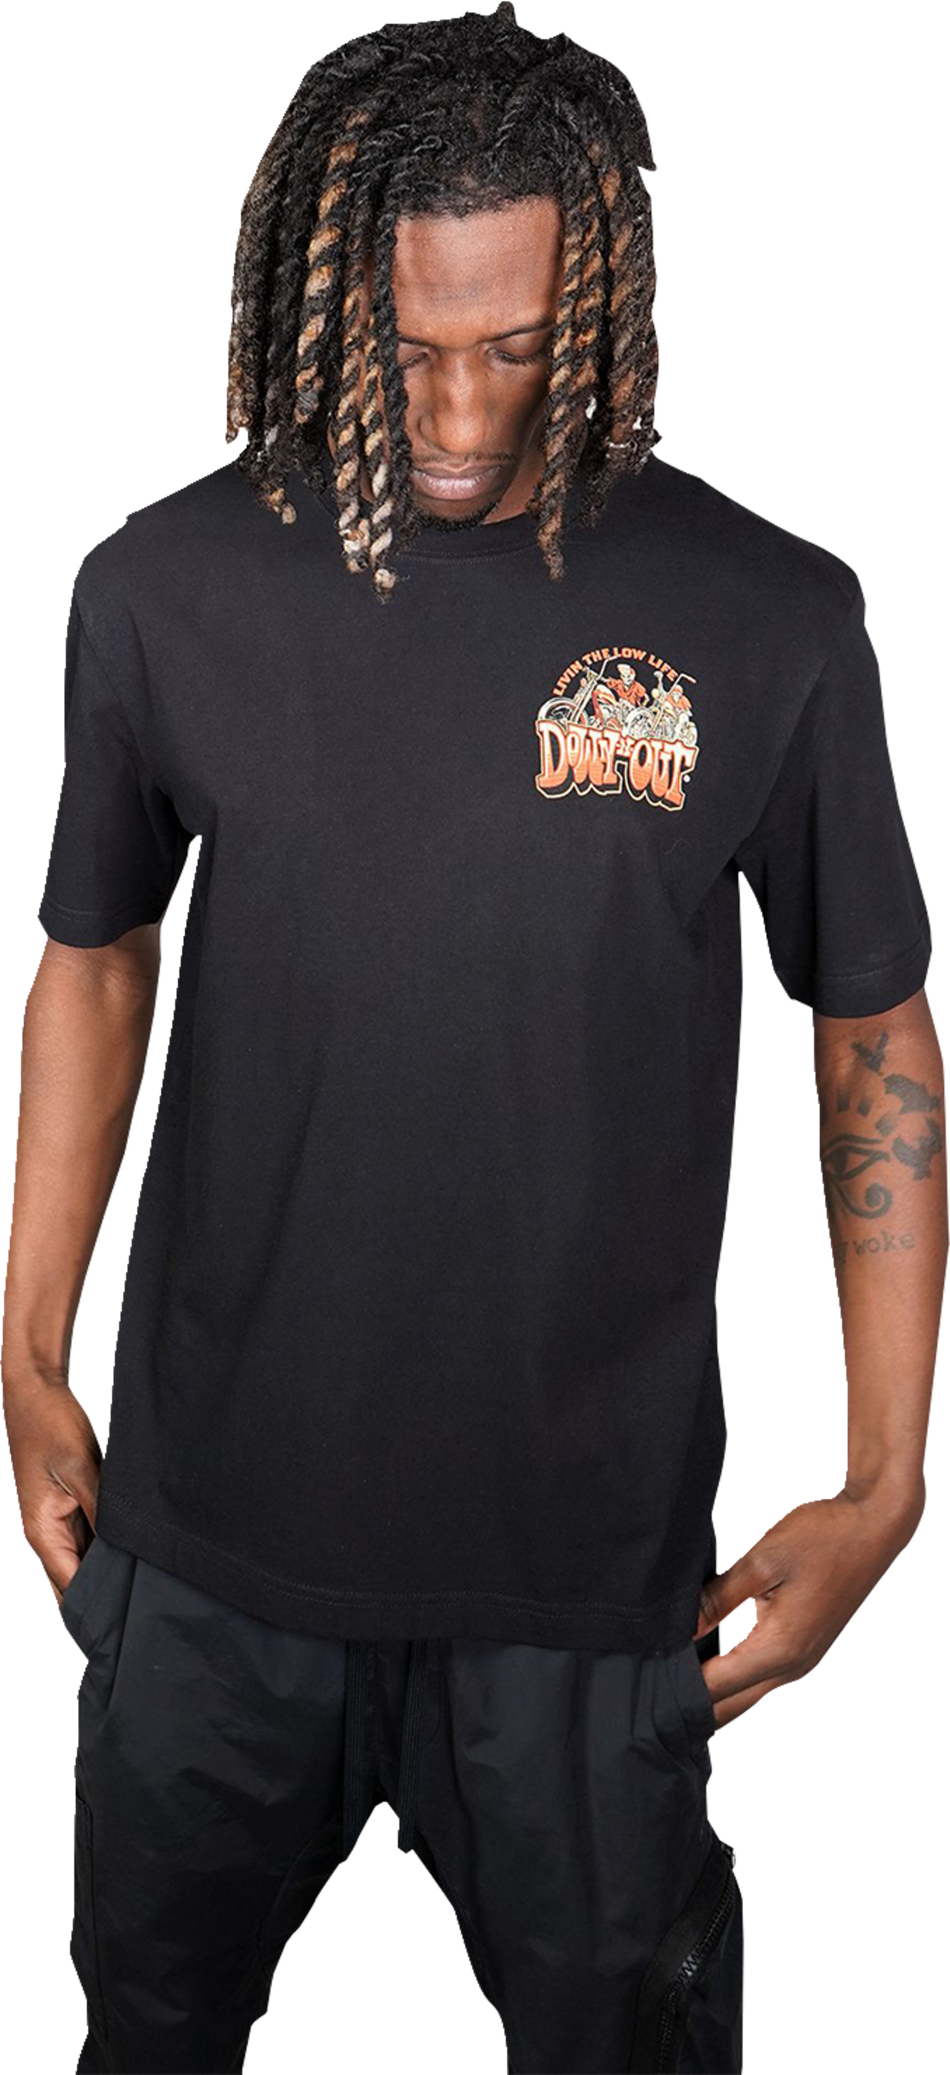 LETHAL THREAT Down-N-Out 4 Life T-Shirt - Black - Large DT10044L